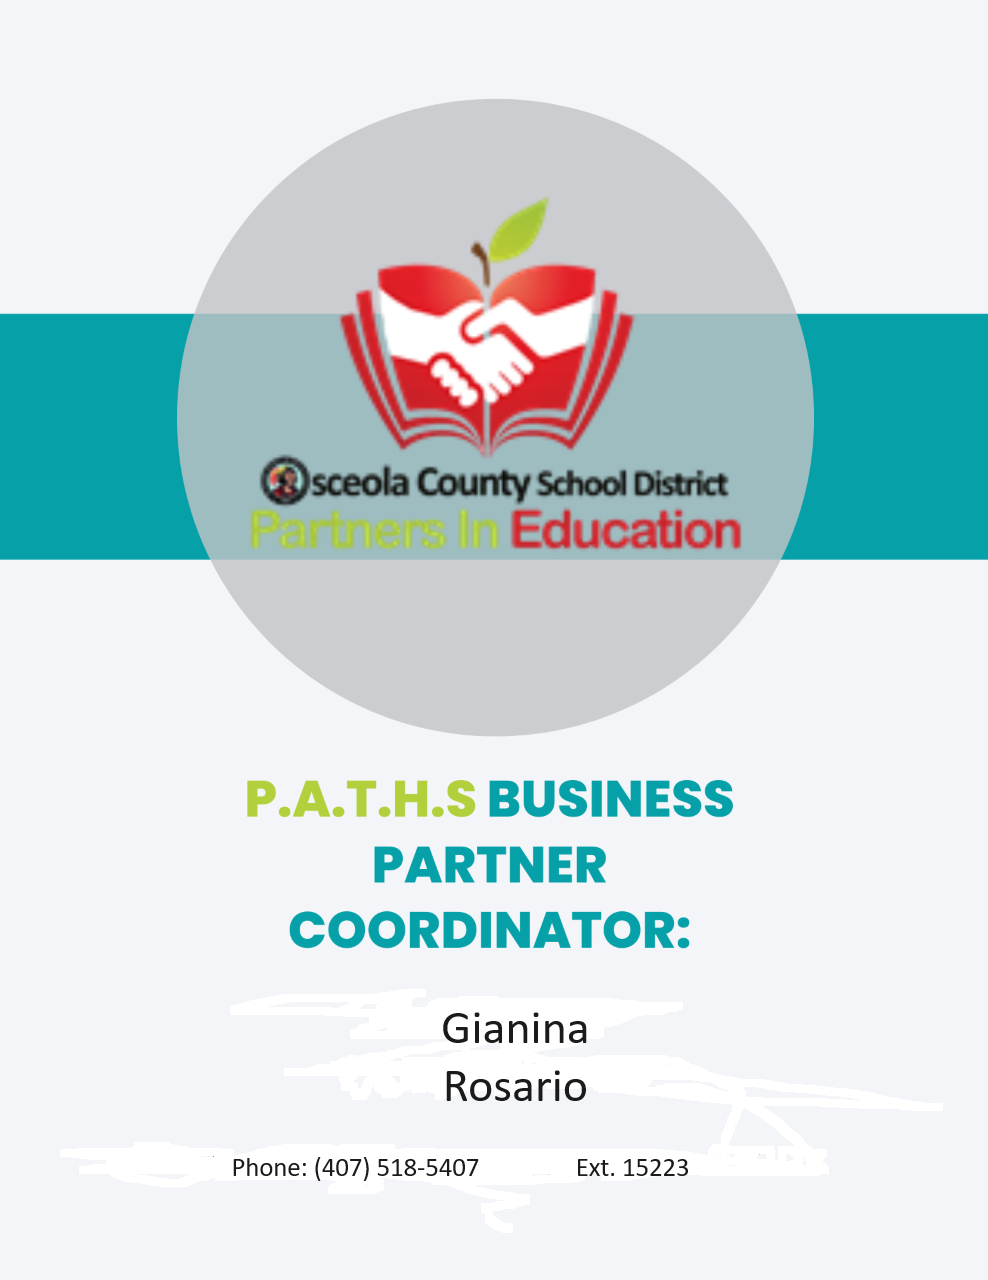 Partners In Education Information for PATHS